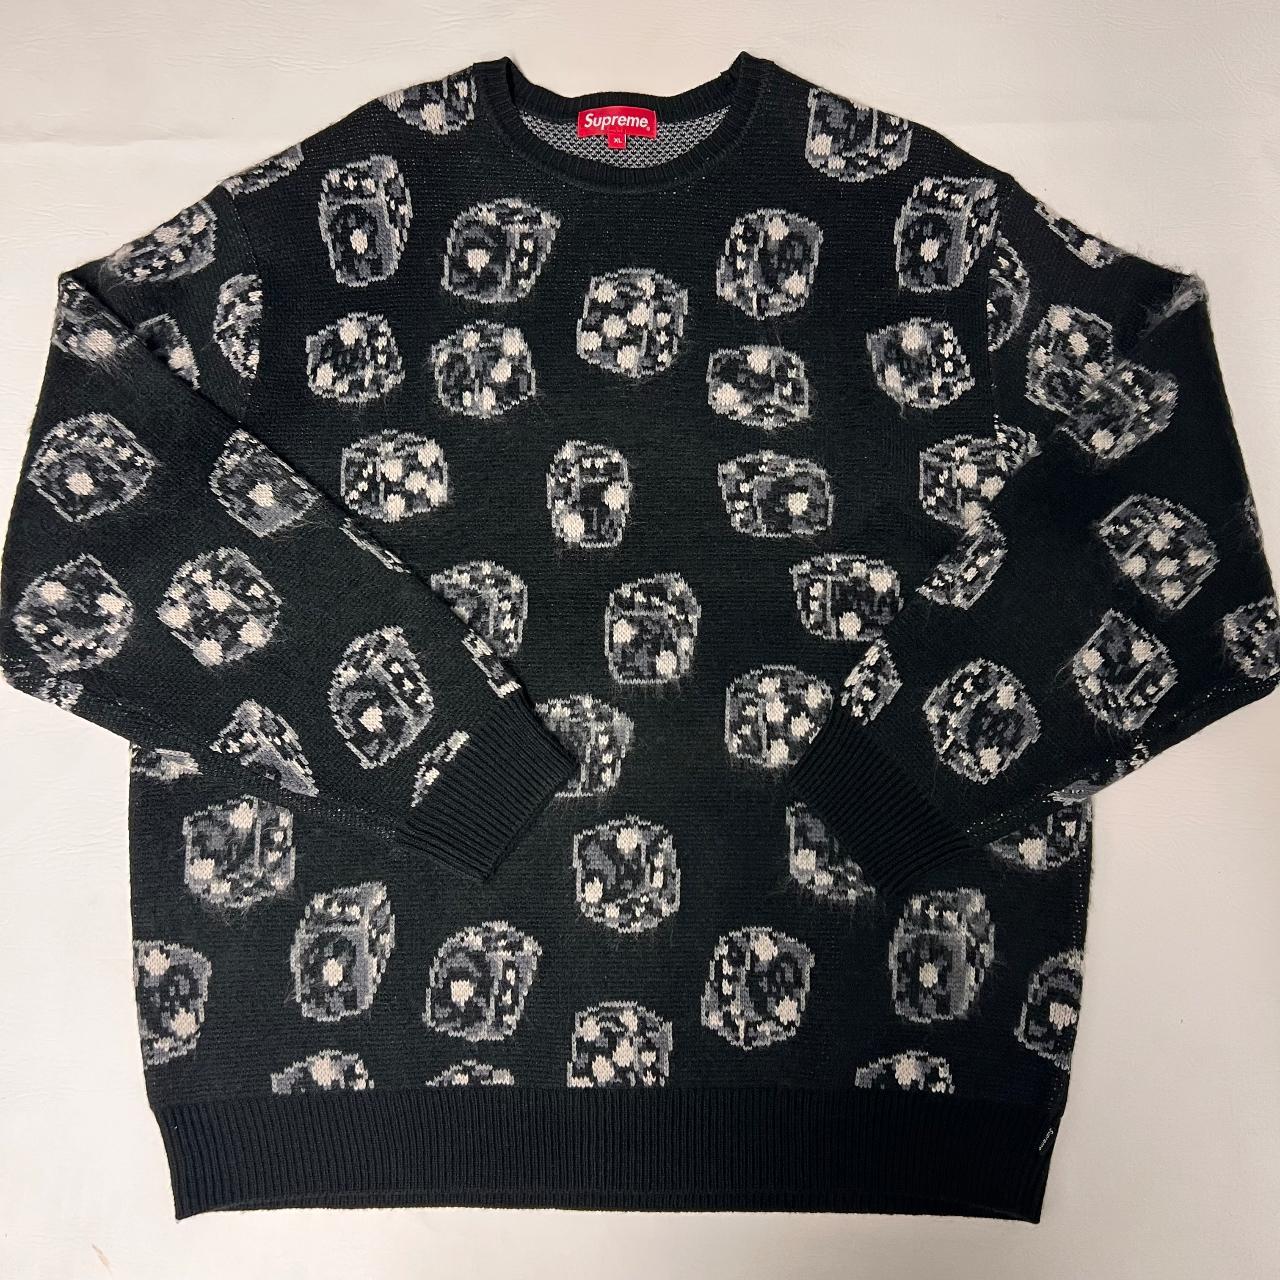 Supreme Dice print sweater Brand new with tags 100%... - Depop